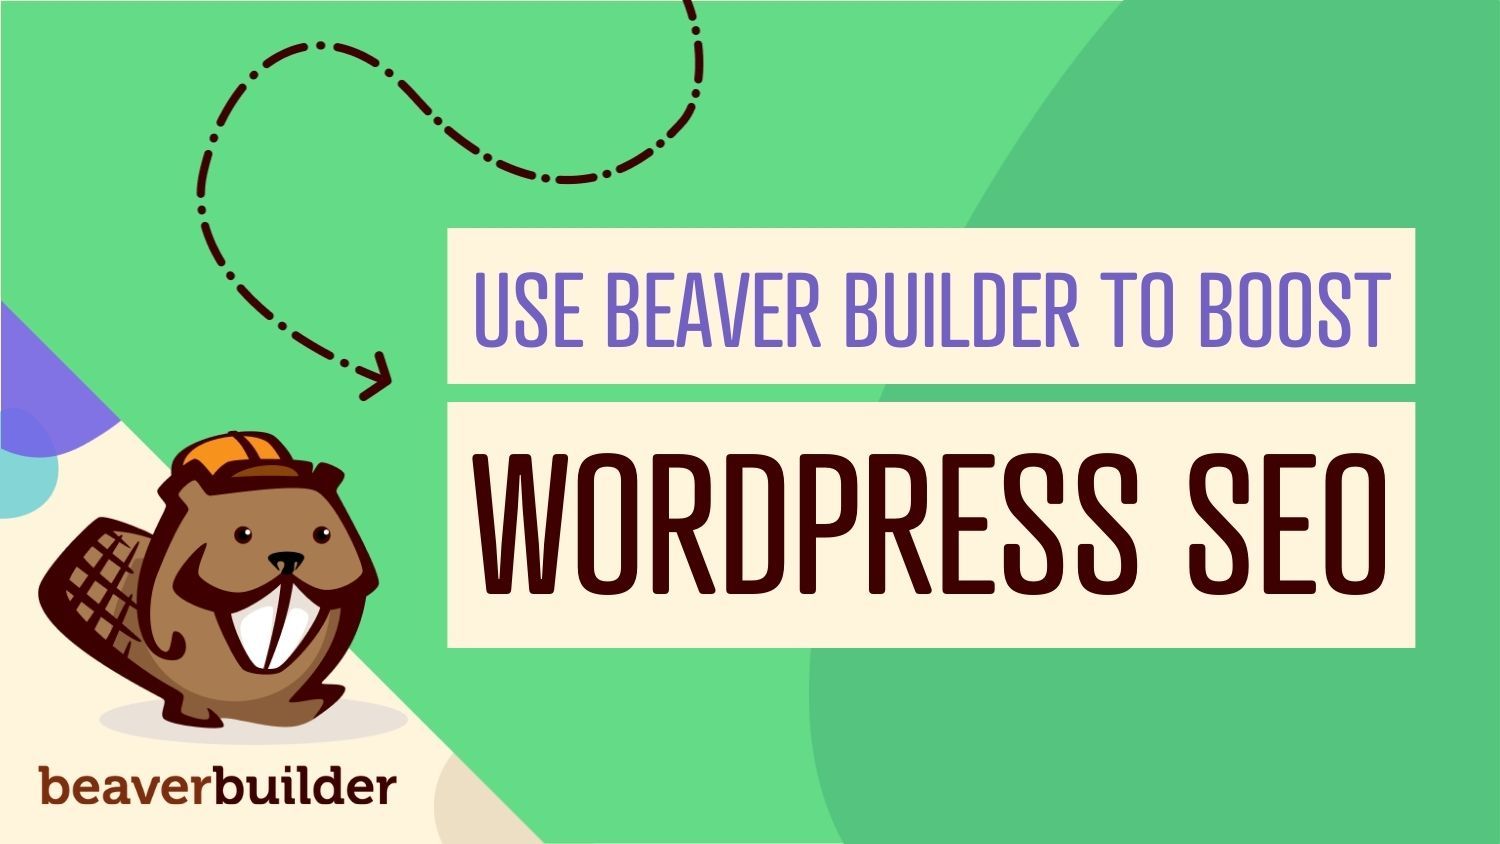 How to use Beaver Buider page builder to boost WordPress SEO